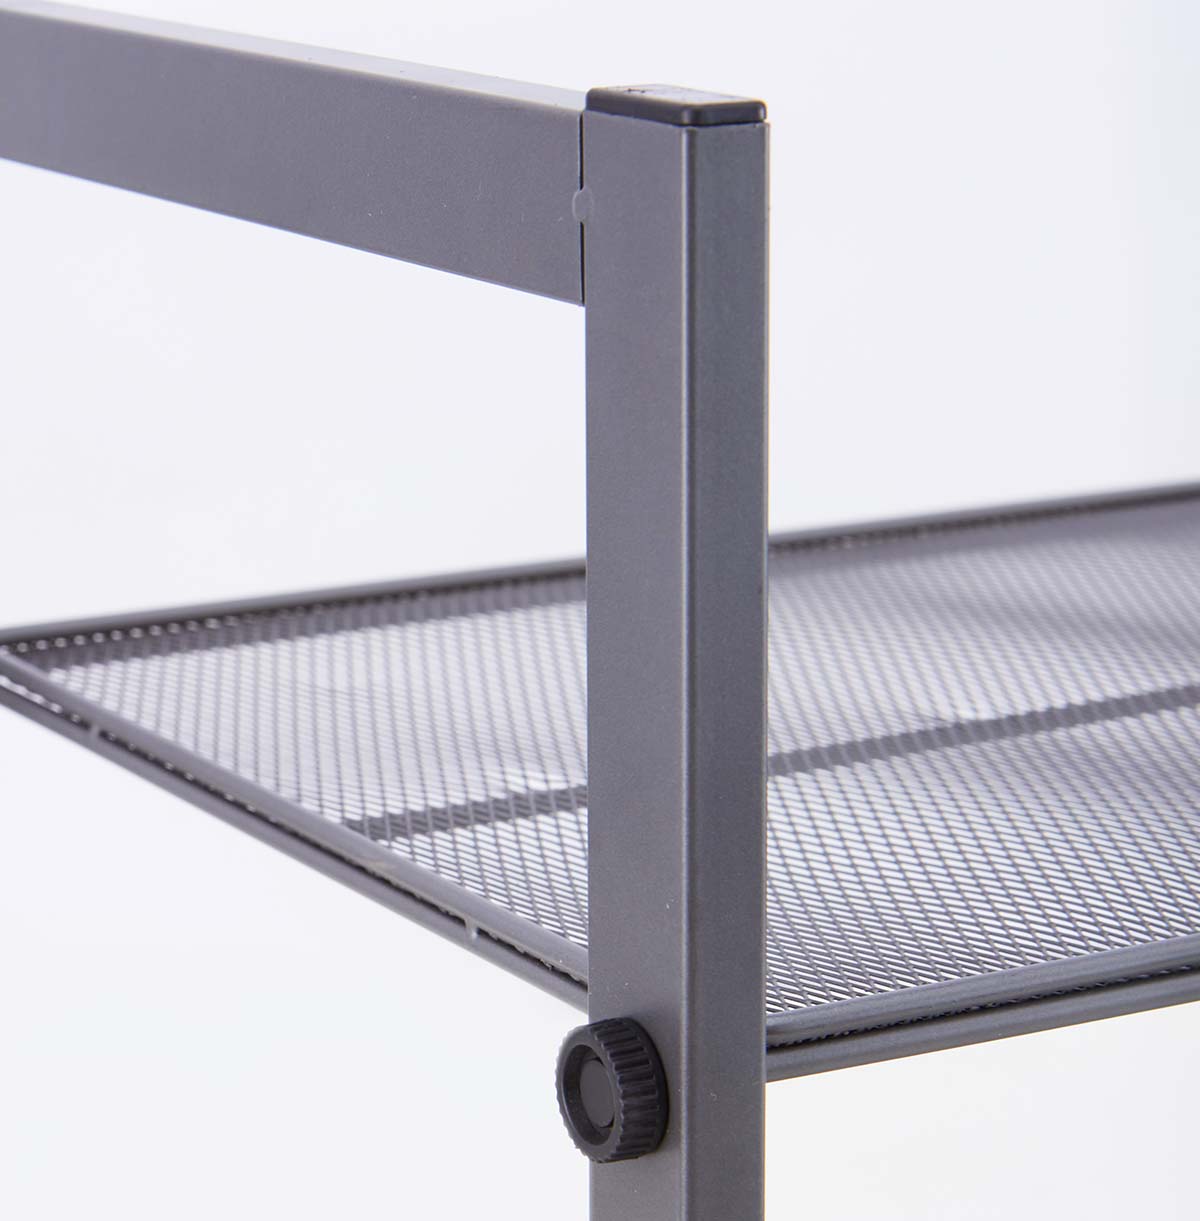 stainless steel wire shelf wall mounted